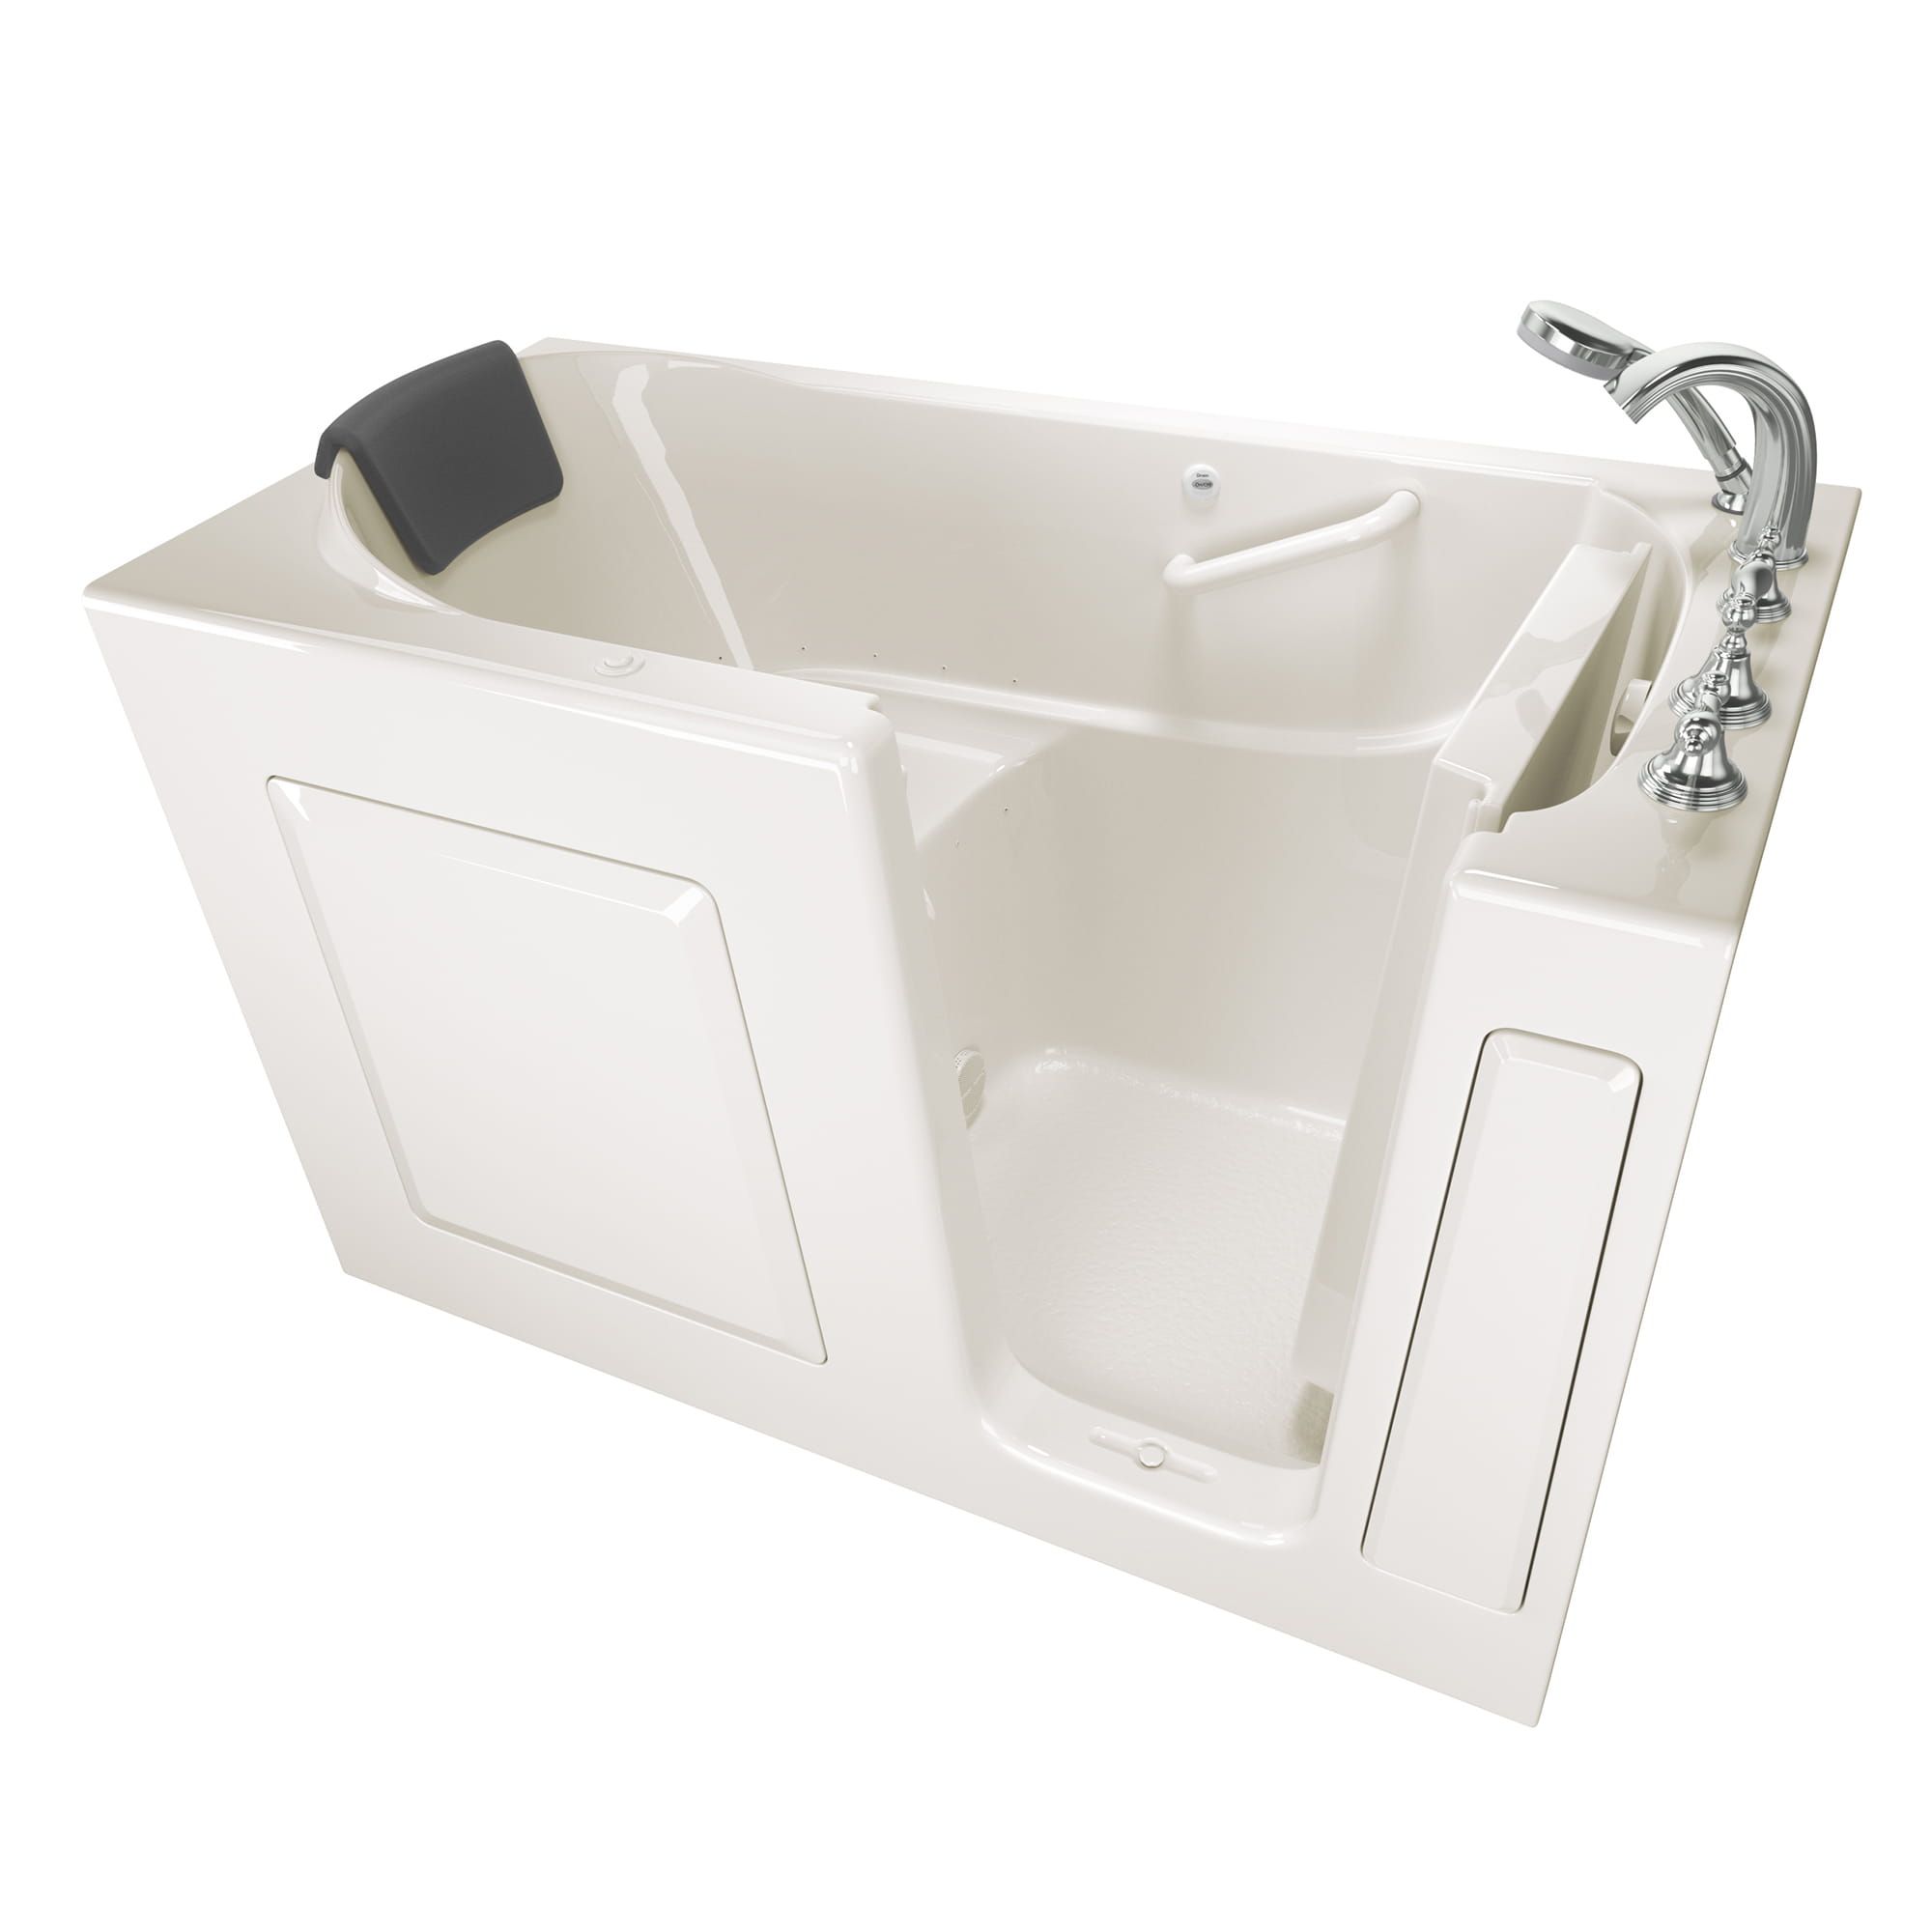 Gelcoat Premium Series 30 x 60 -Inch Walk-in Tub With Air Spa System - Right-Hand Drain With Faucet